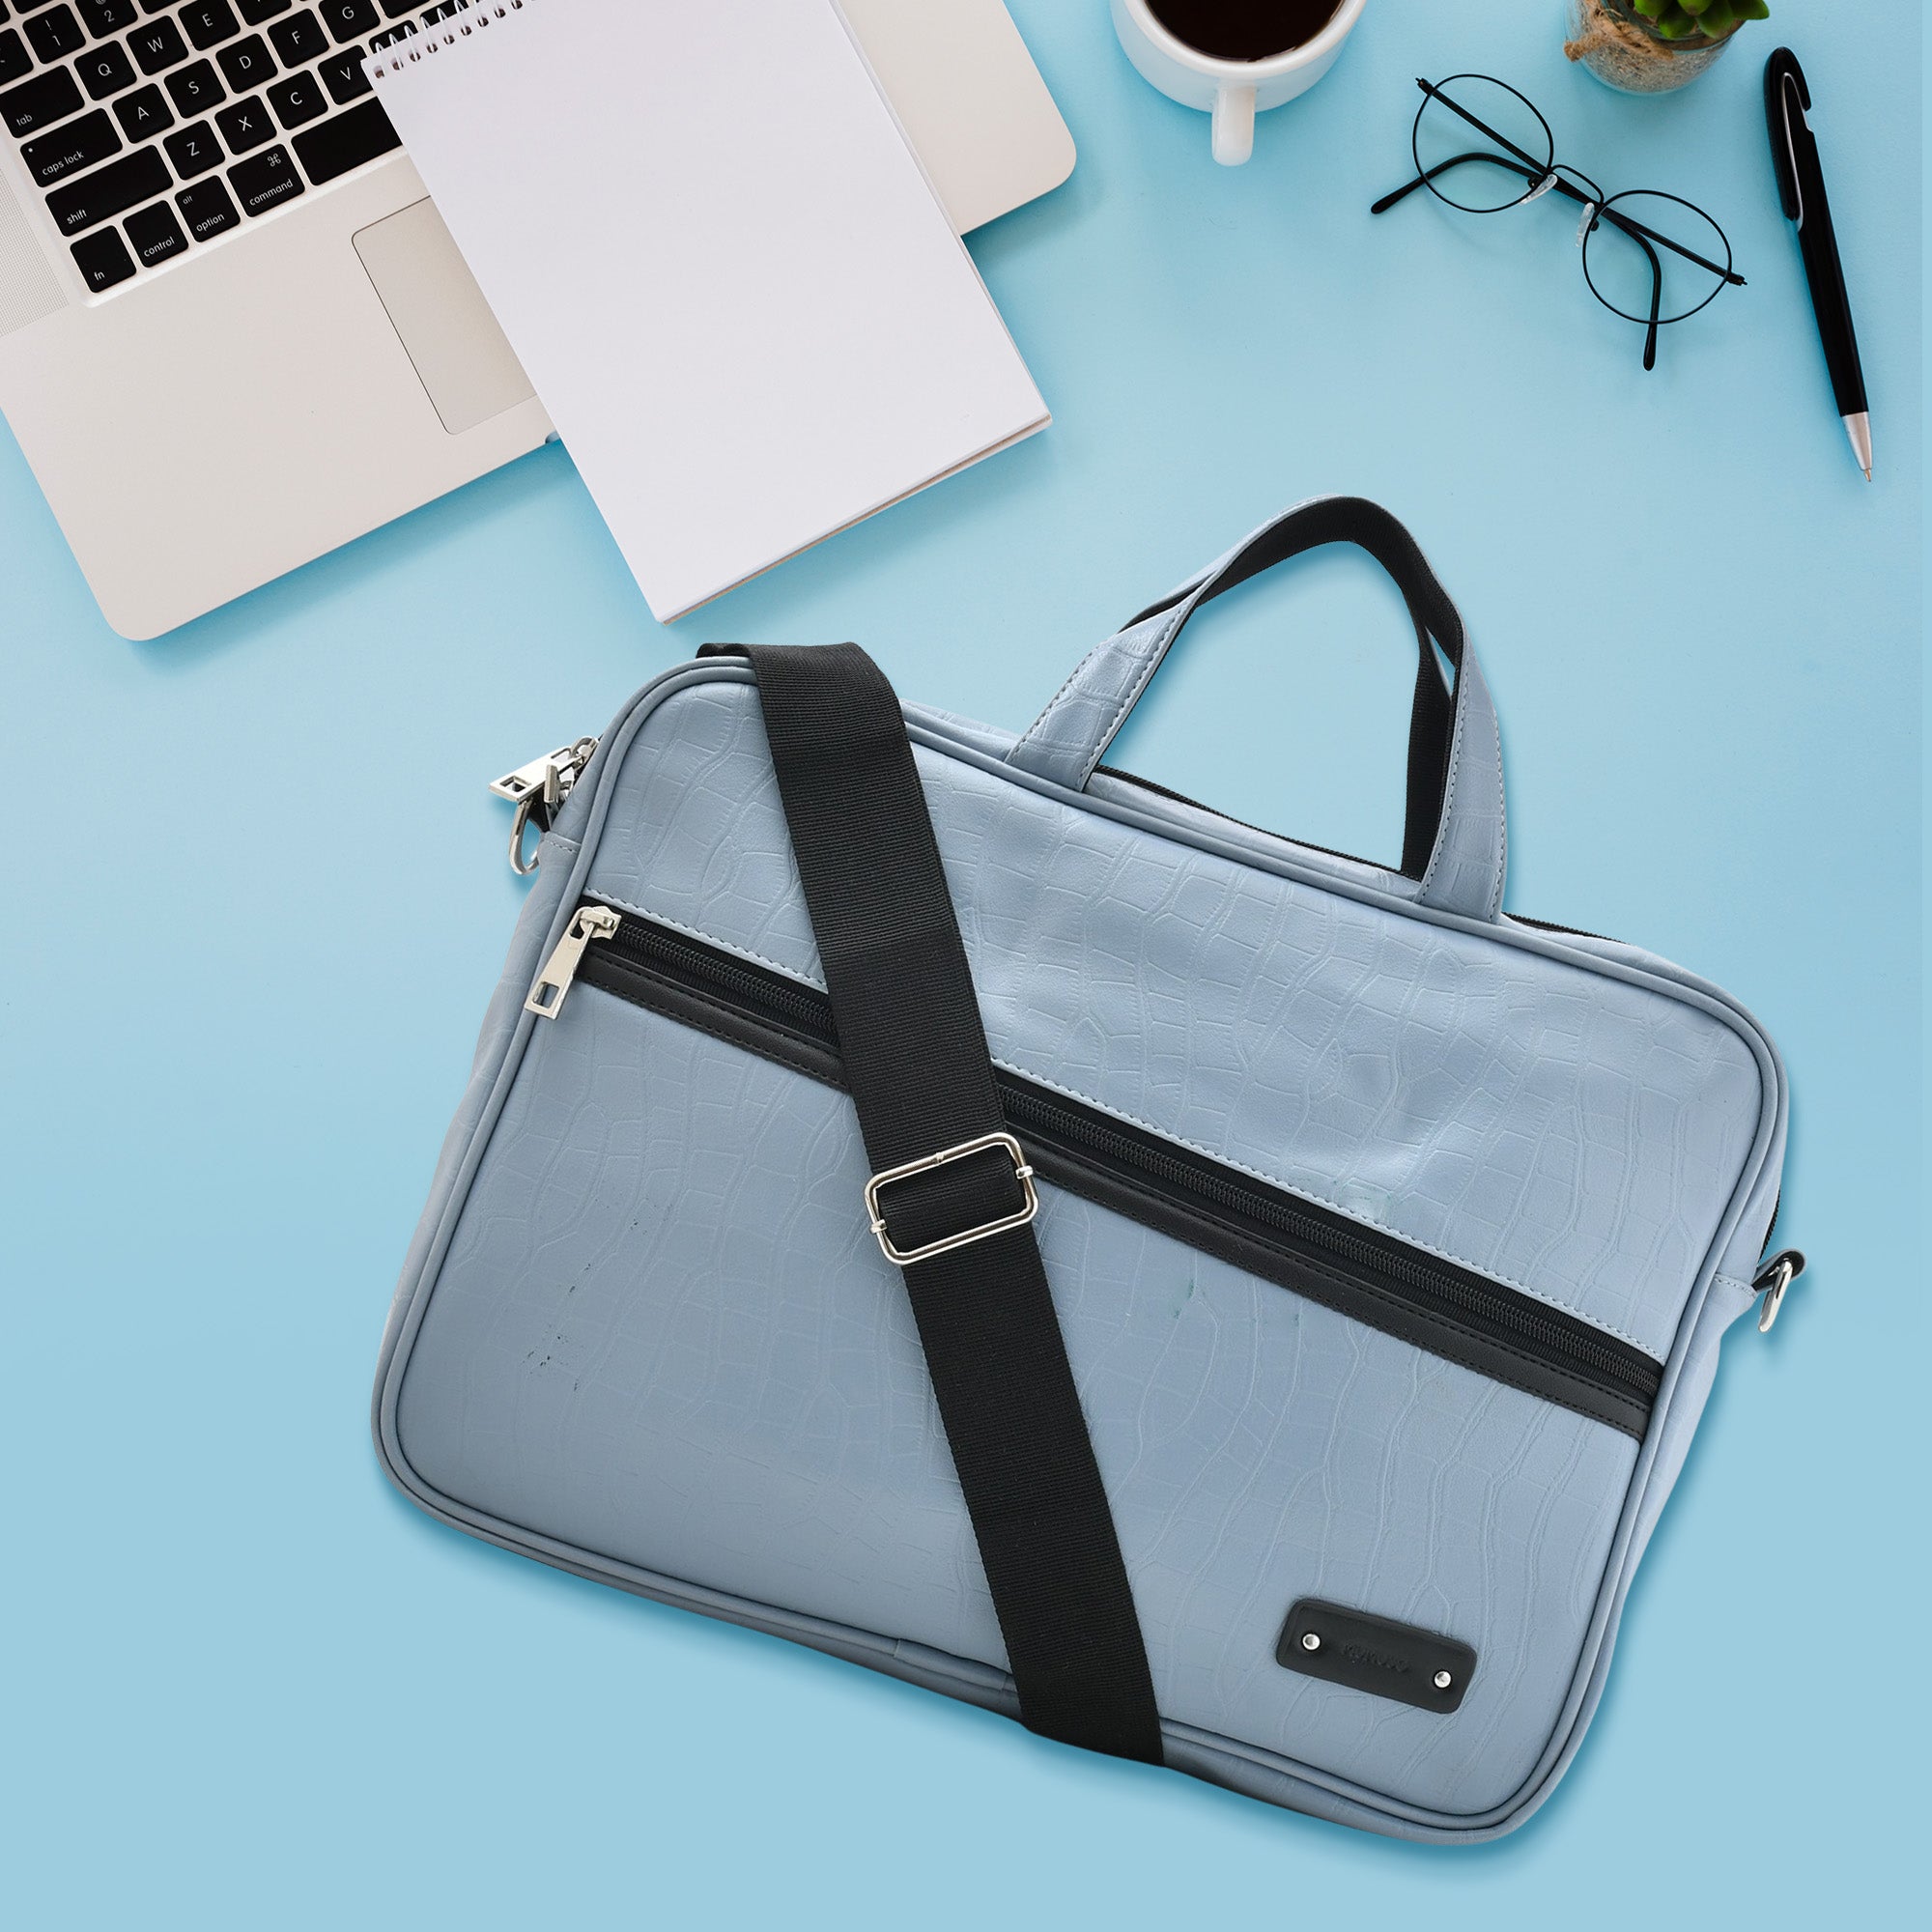 Aspinal of London Mount Street Small Pebble Grain Leather Laptop Bag, Navy  at John Lewis & Partners